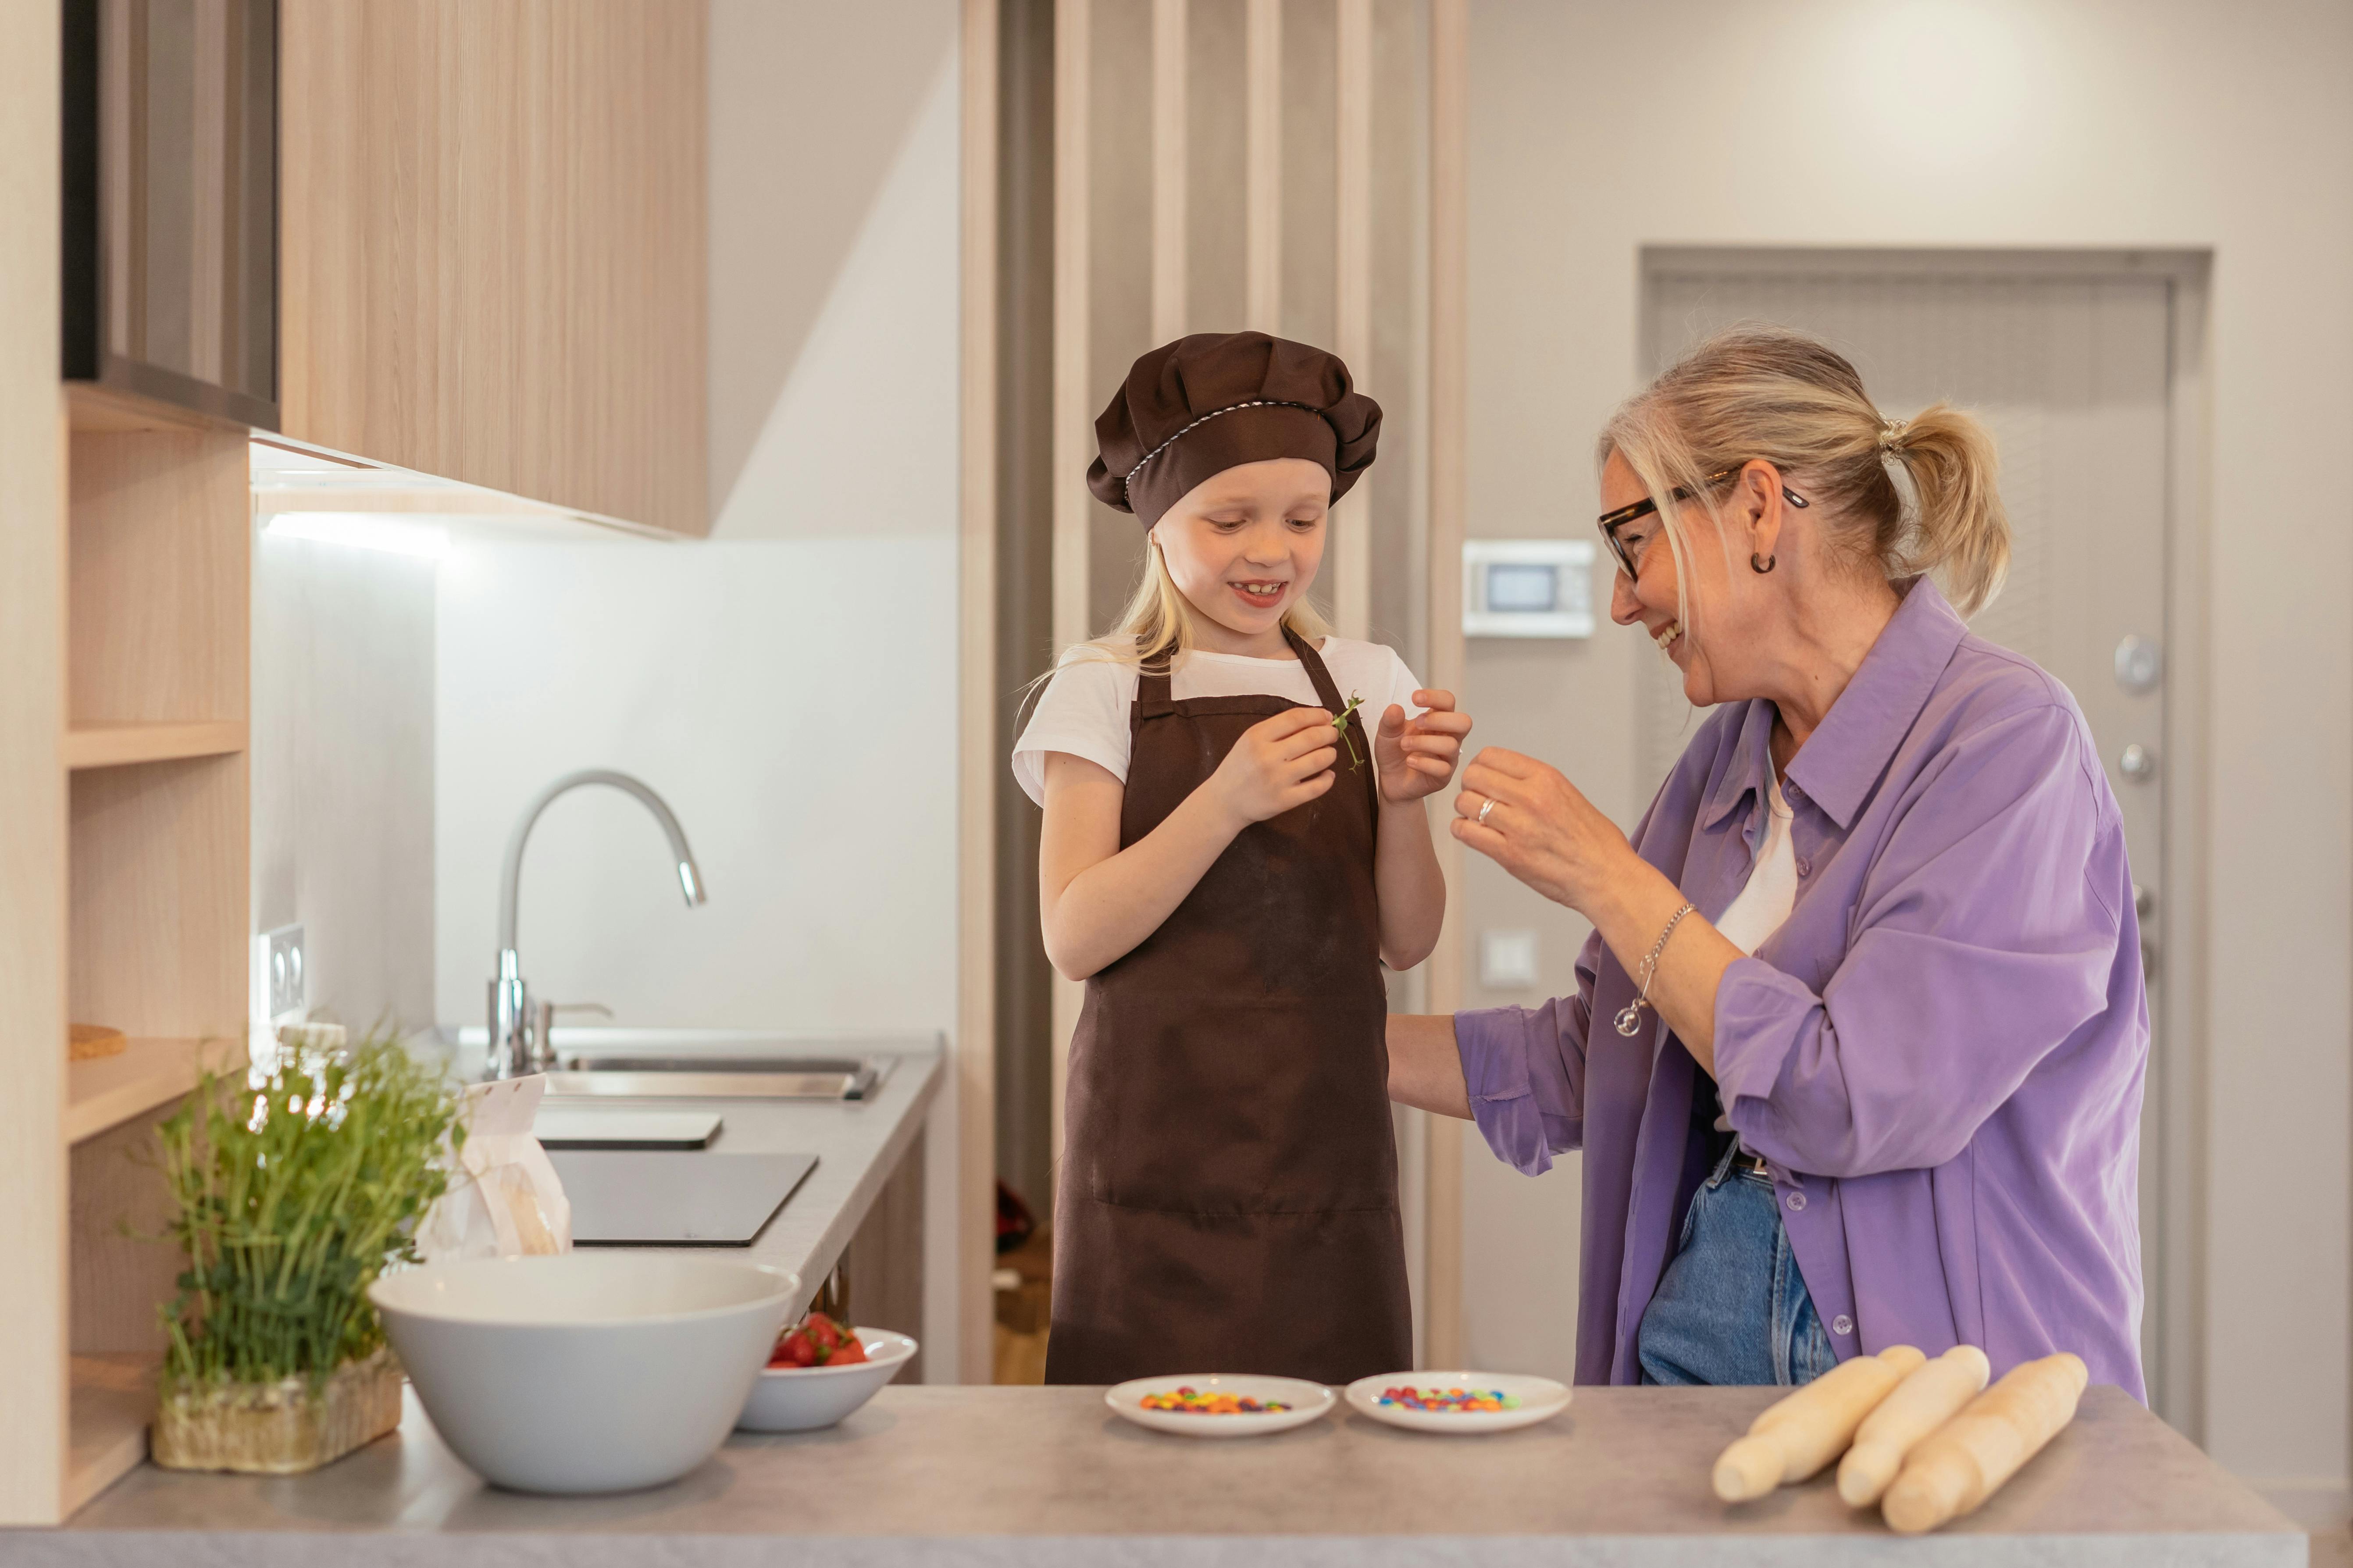 A happy woman in the kitchen with her grandchild | Source: Pexels